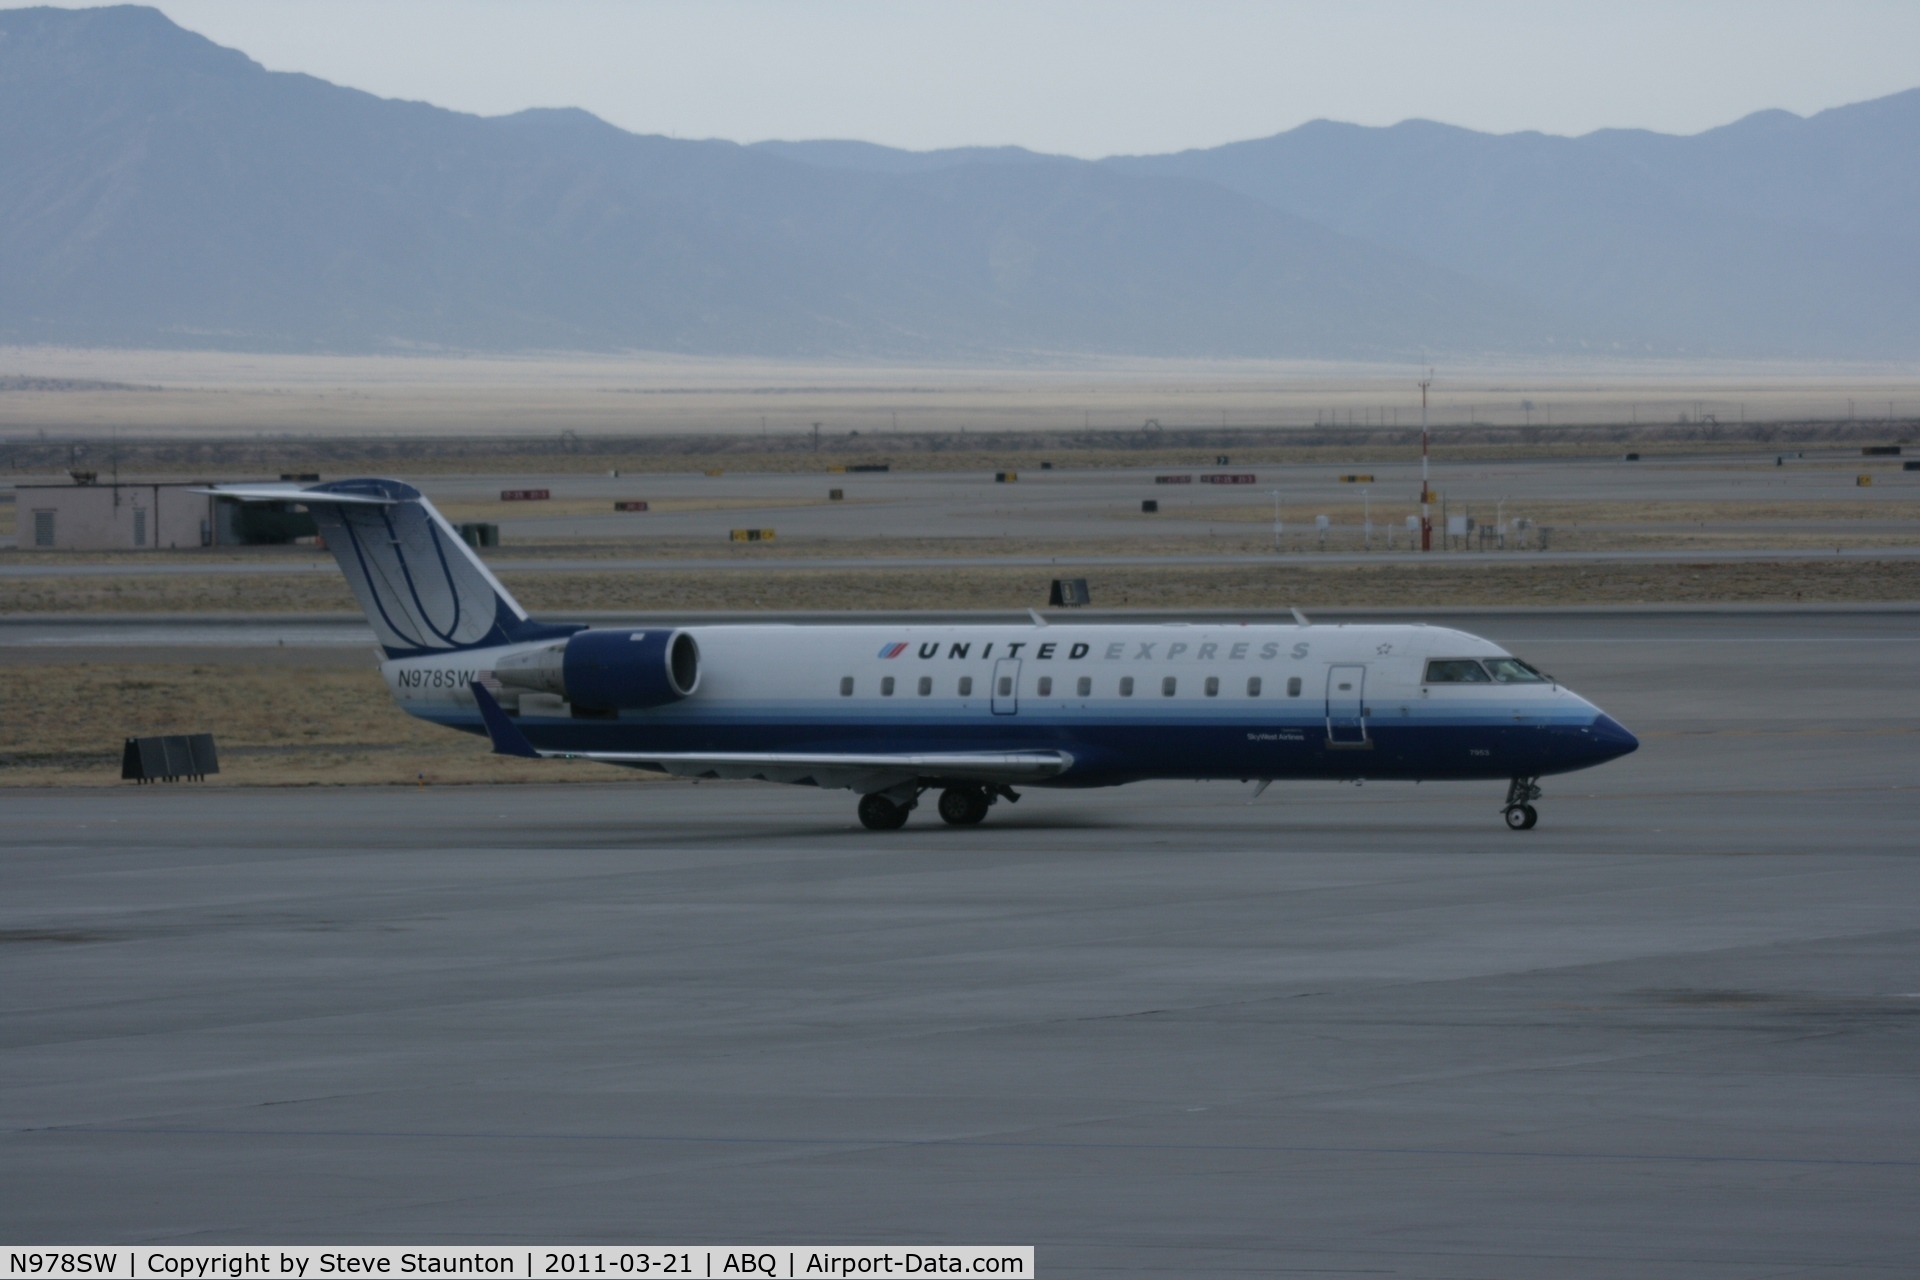 N978SW, 2004 Bombardier CRJ-200ER (CL-600-2B19) C/N 7953, Taken at Alburquerque International Sunport Airport, New Mexico in March 2011 whilst on an Aeroprint Aviation tour